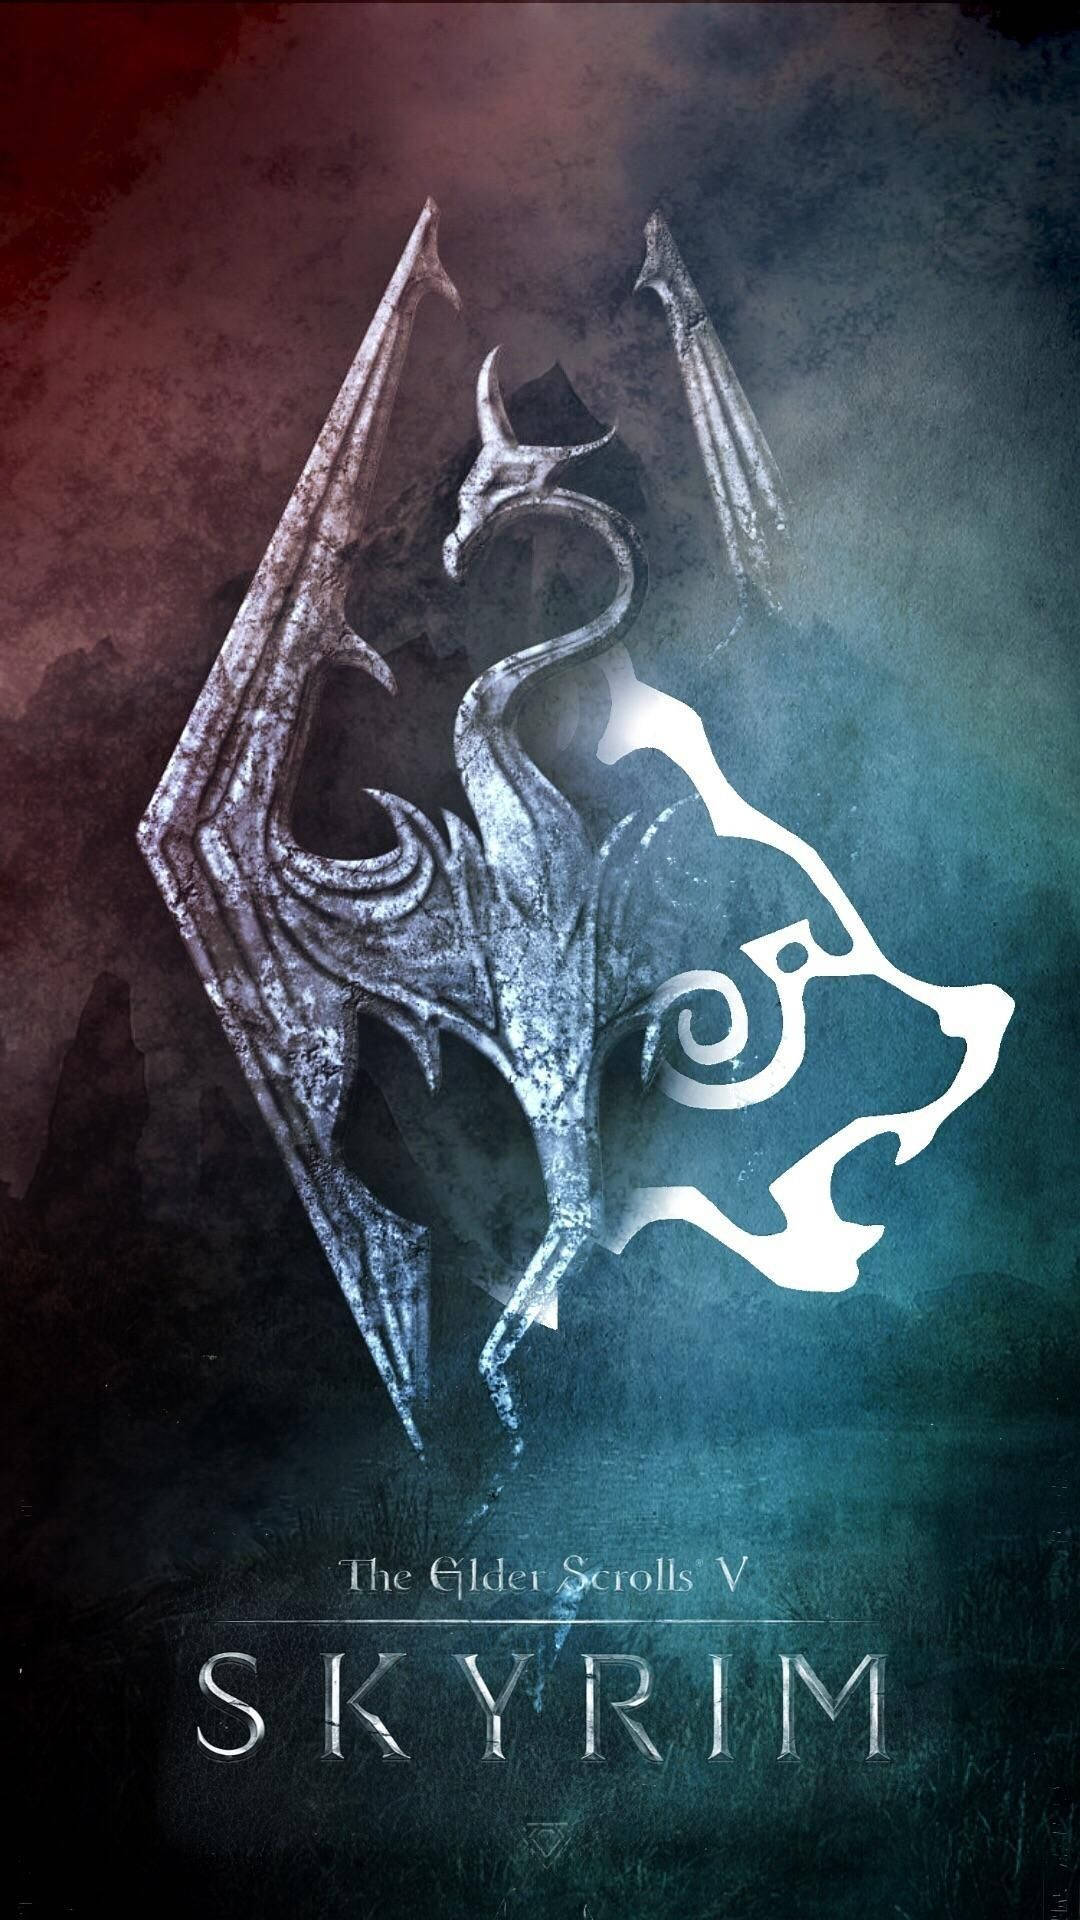 Explore the world of Tamriel anytime with the Skyrim Phone Wallpaper